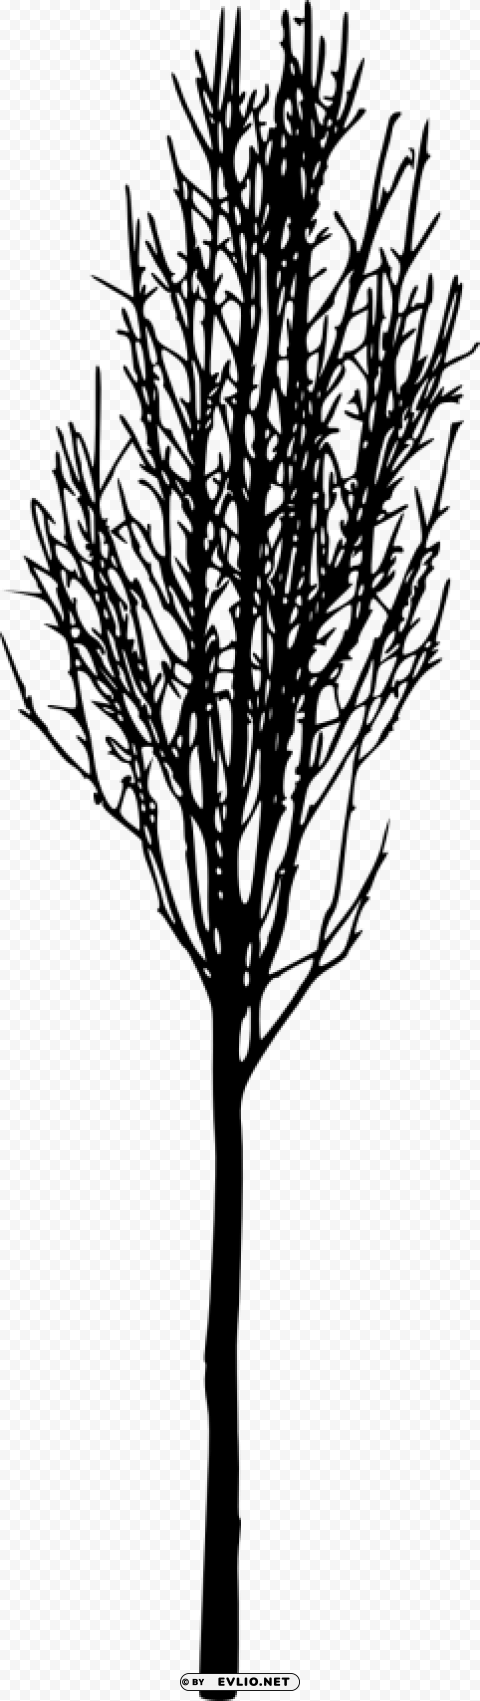 simple bare tree silhouette Isolated Artwork with Clear Background in PNG